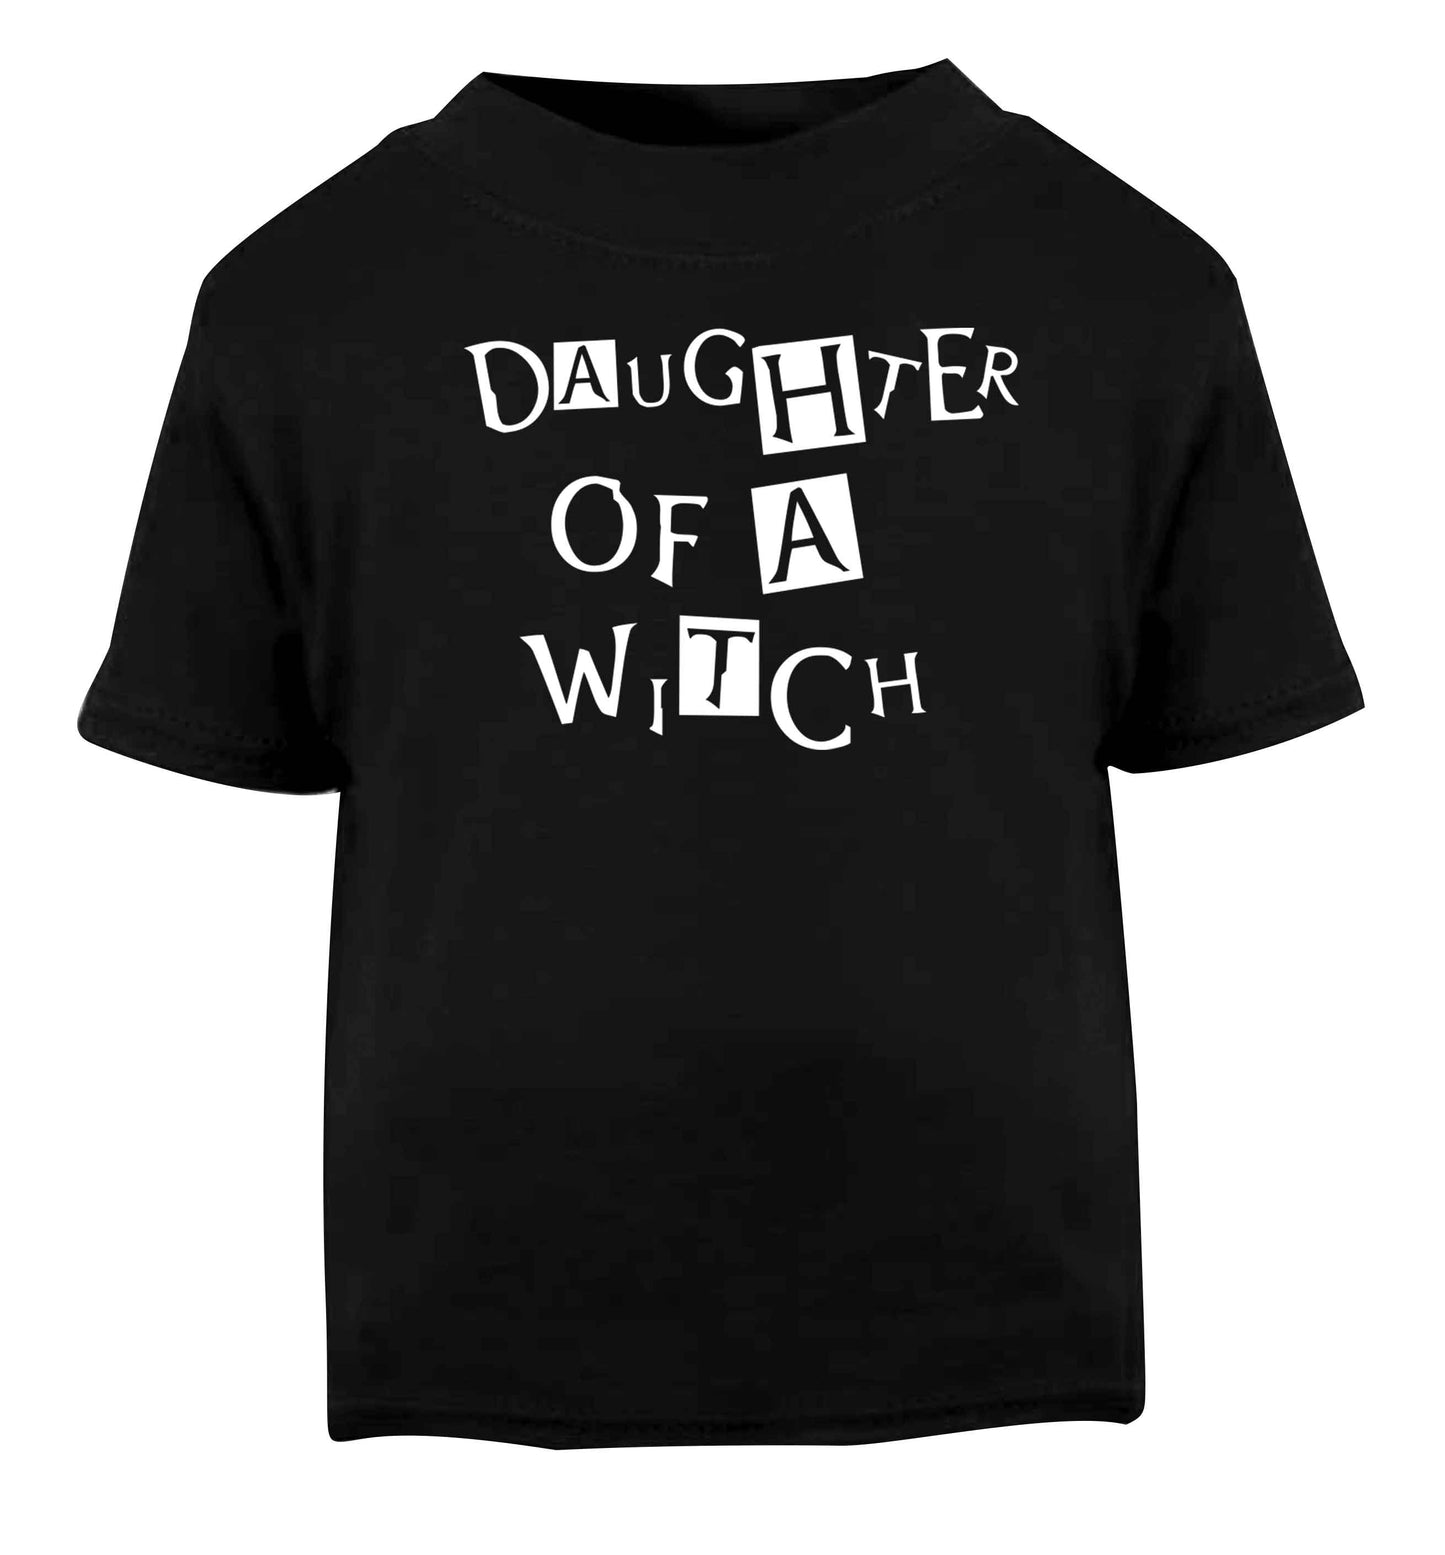 Daughter of a witch Black baby toddler Tshirt 2 years